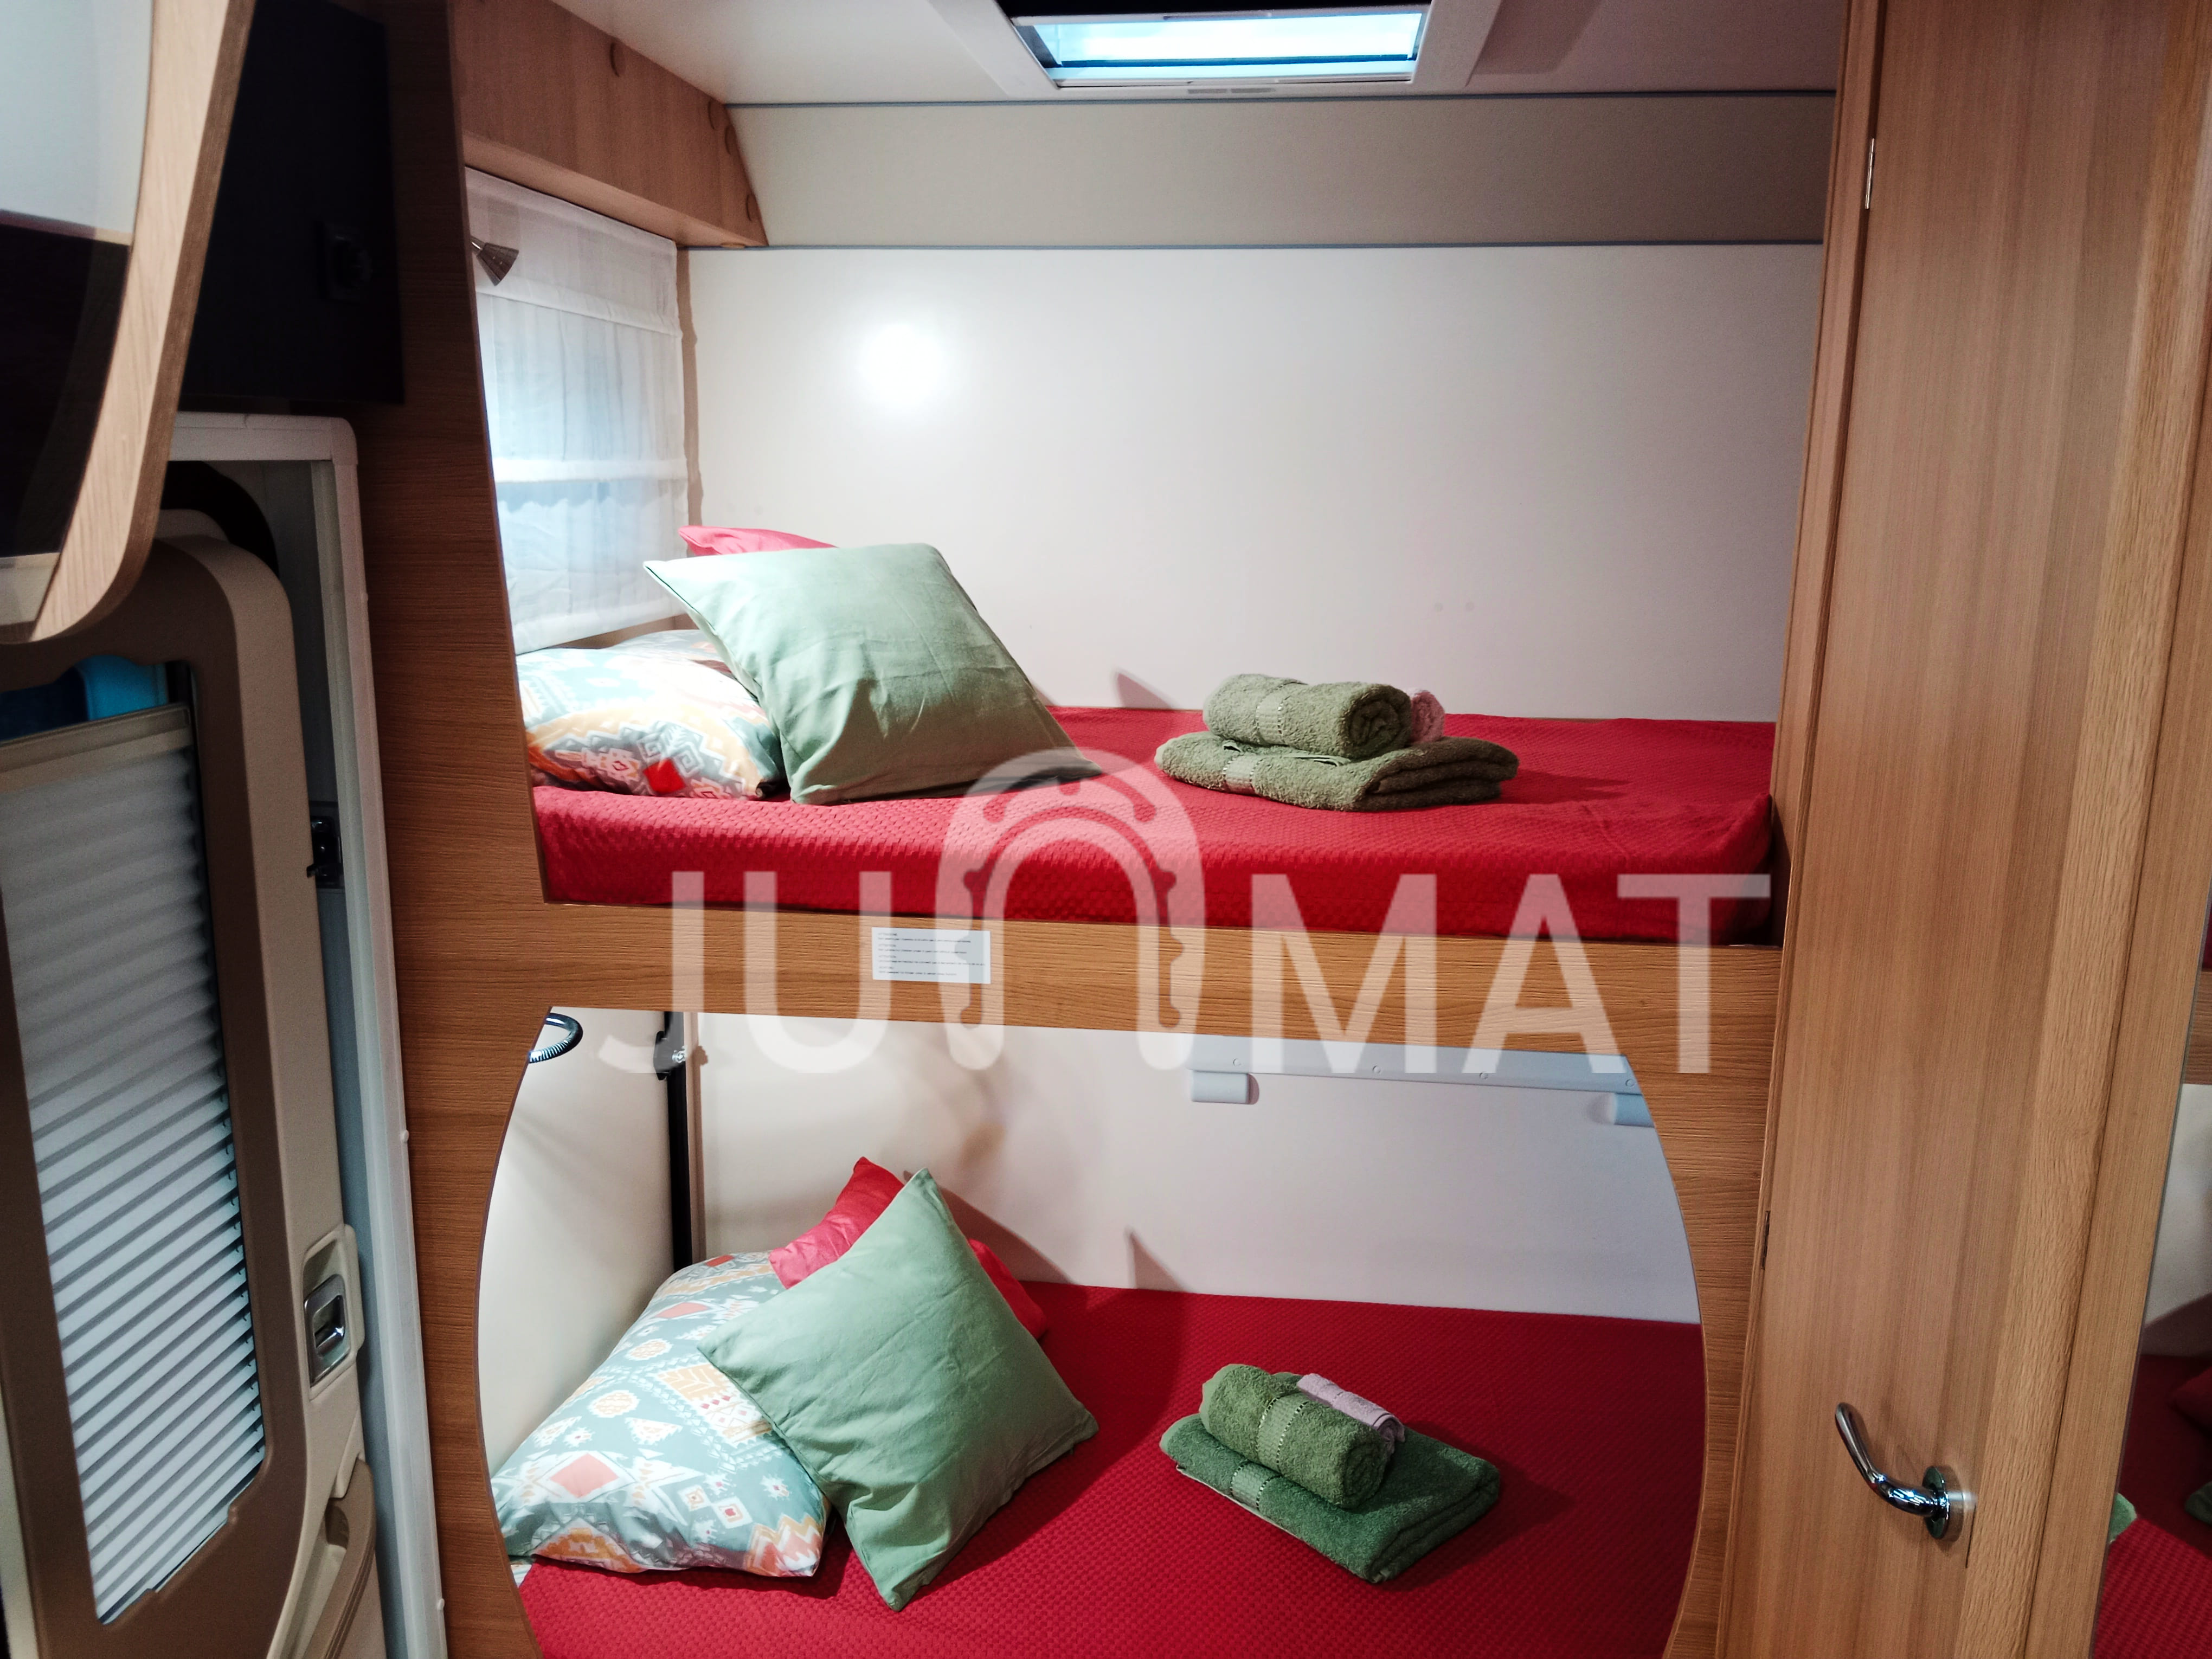 image of the motorhome bedrooms